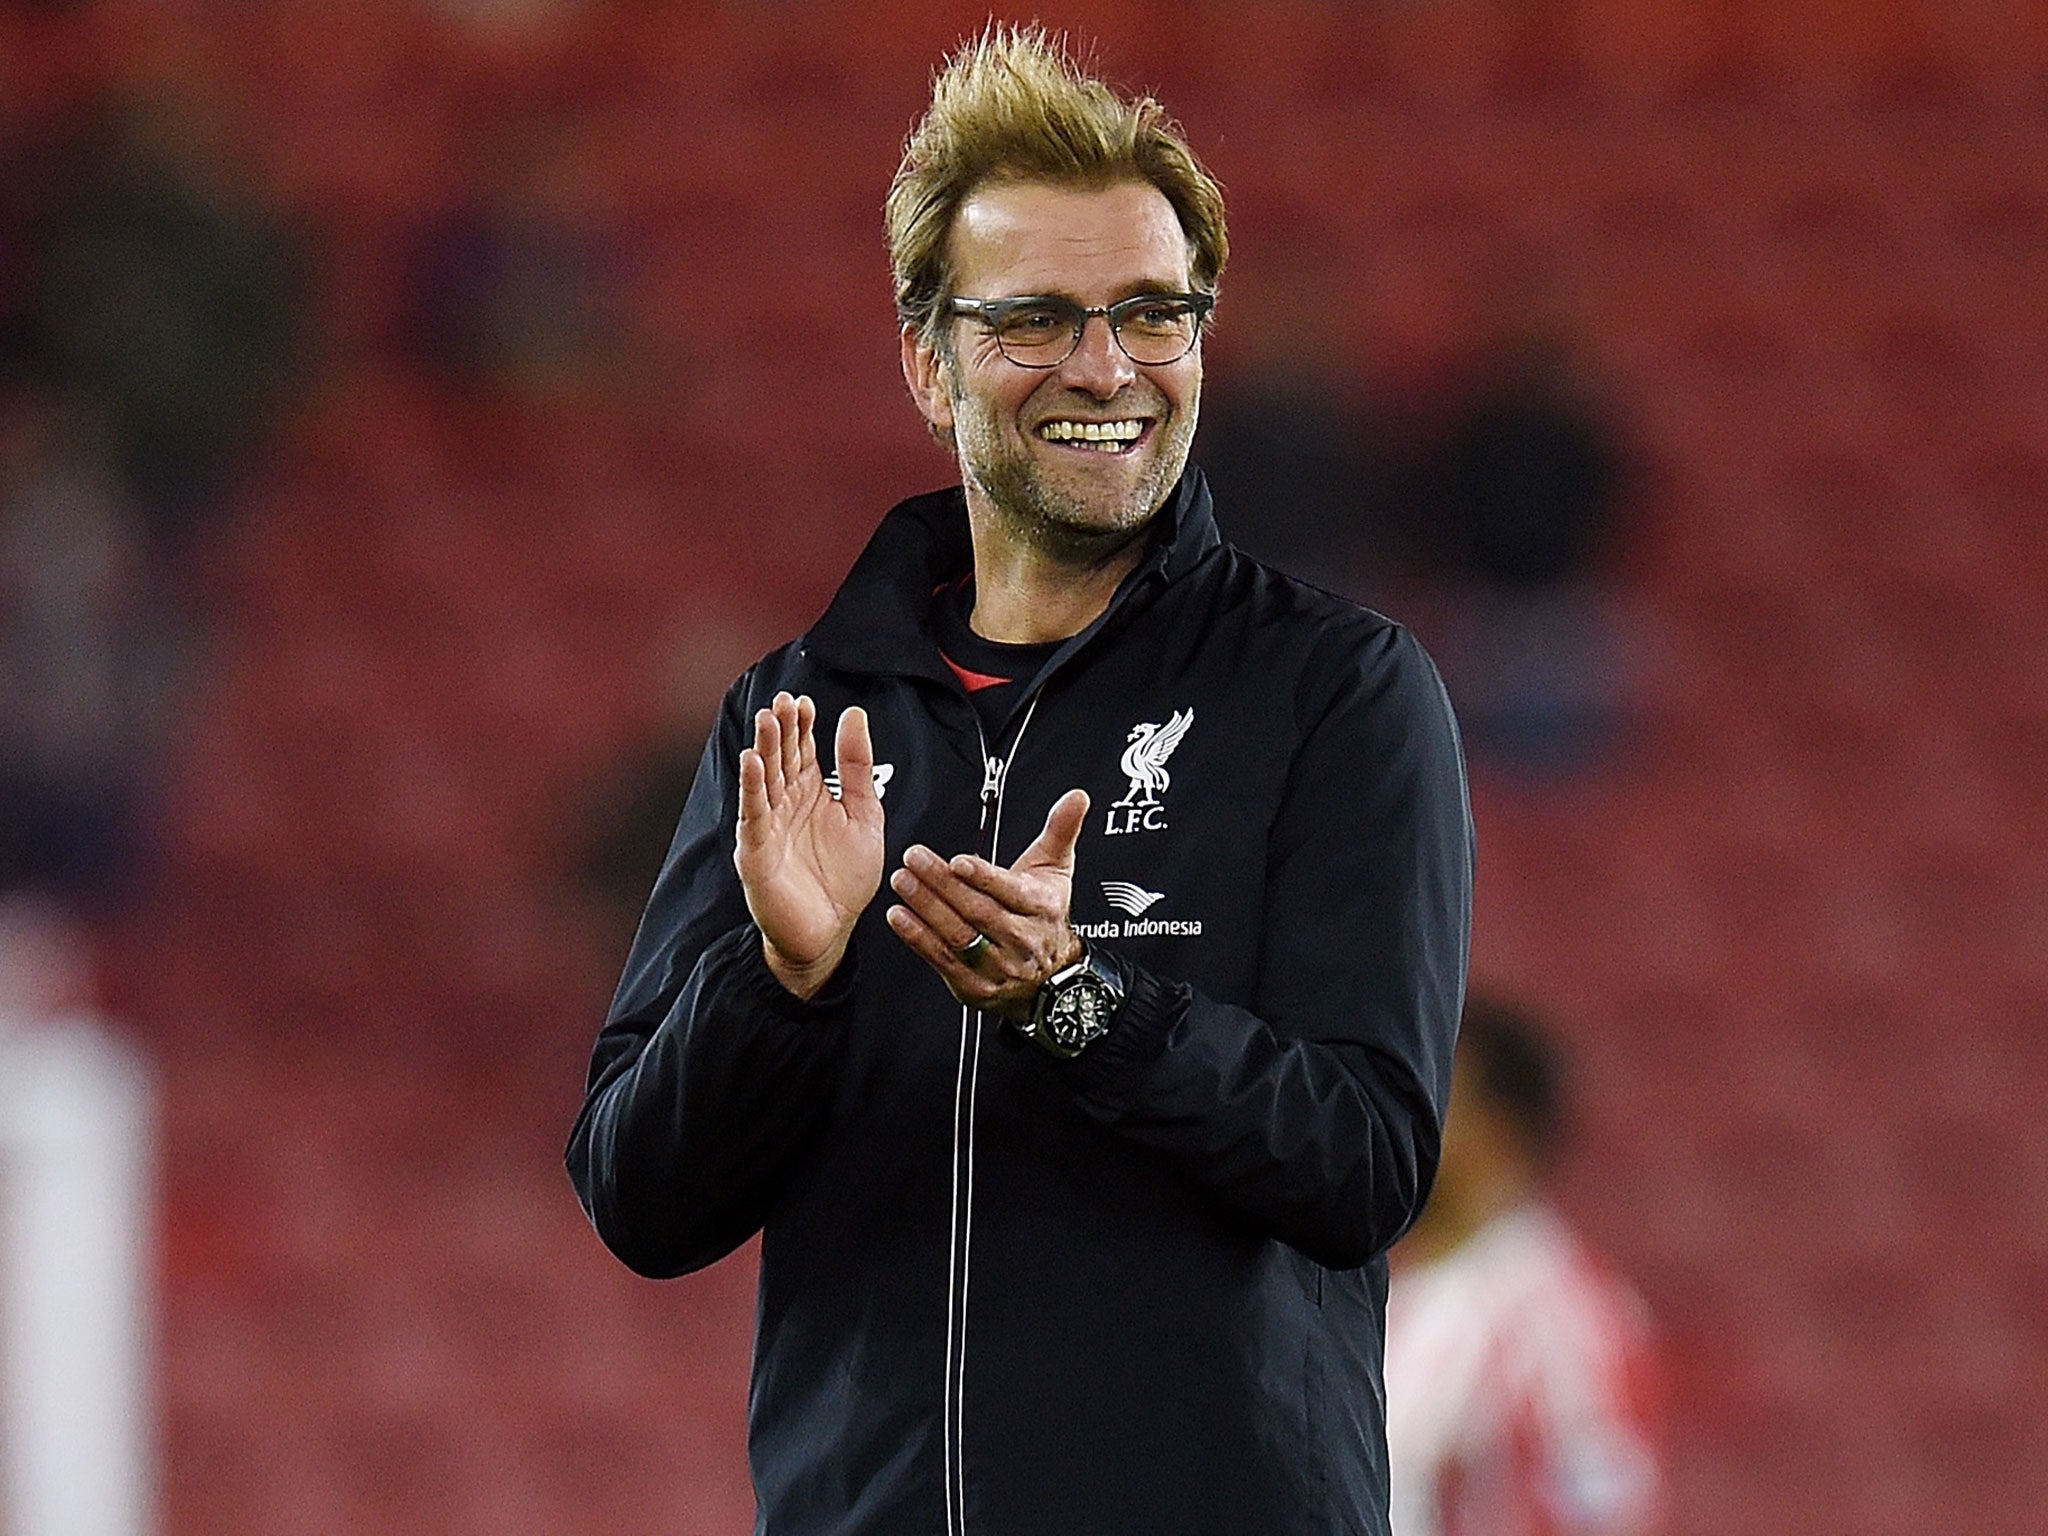 ‘I said to him after the game, “Now I know what everybody is talking about,”’ said Jürgen Klopp